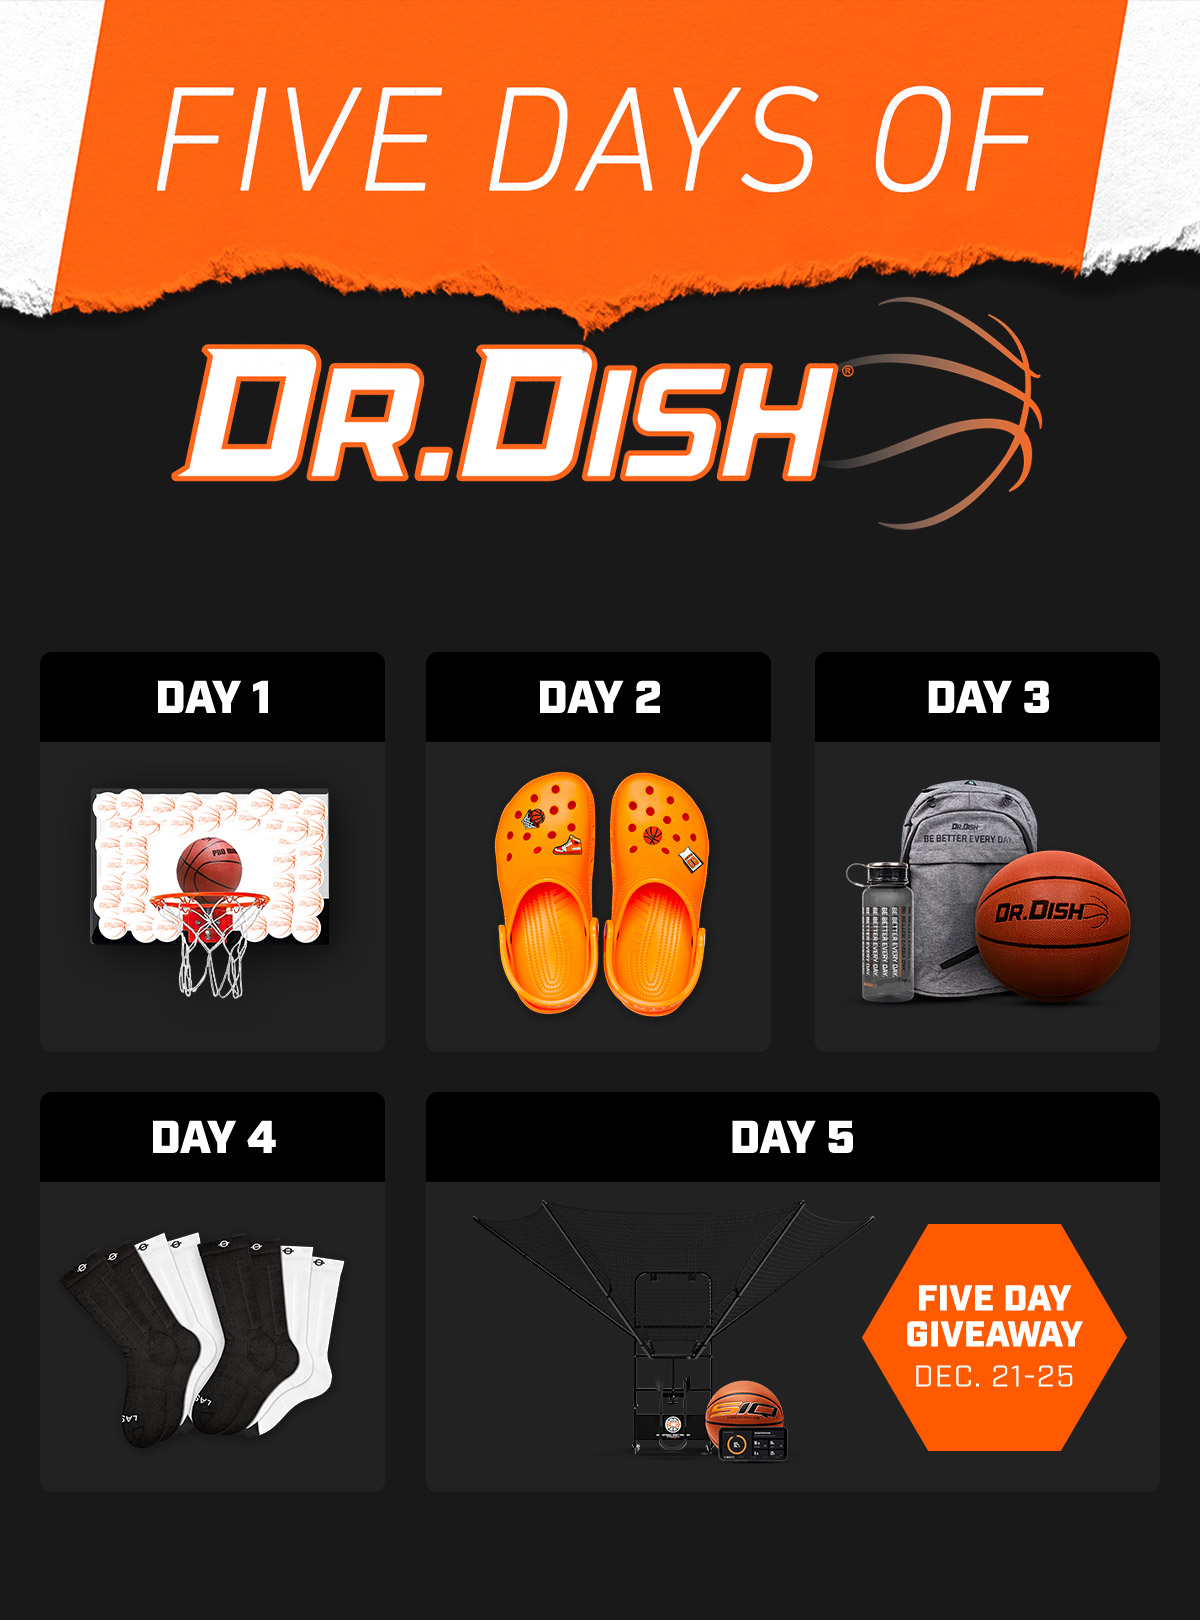 Enter to Win Basketball Player Favorites: 5 Days of Dr. Dish Giveaways